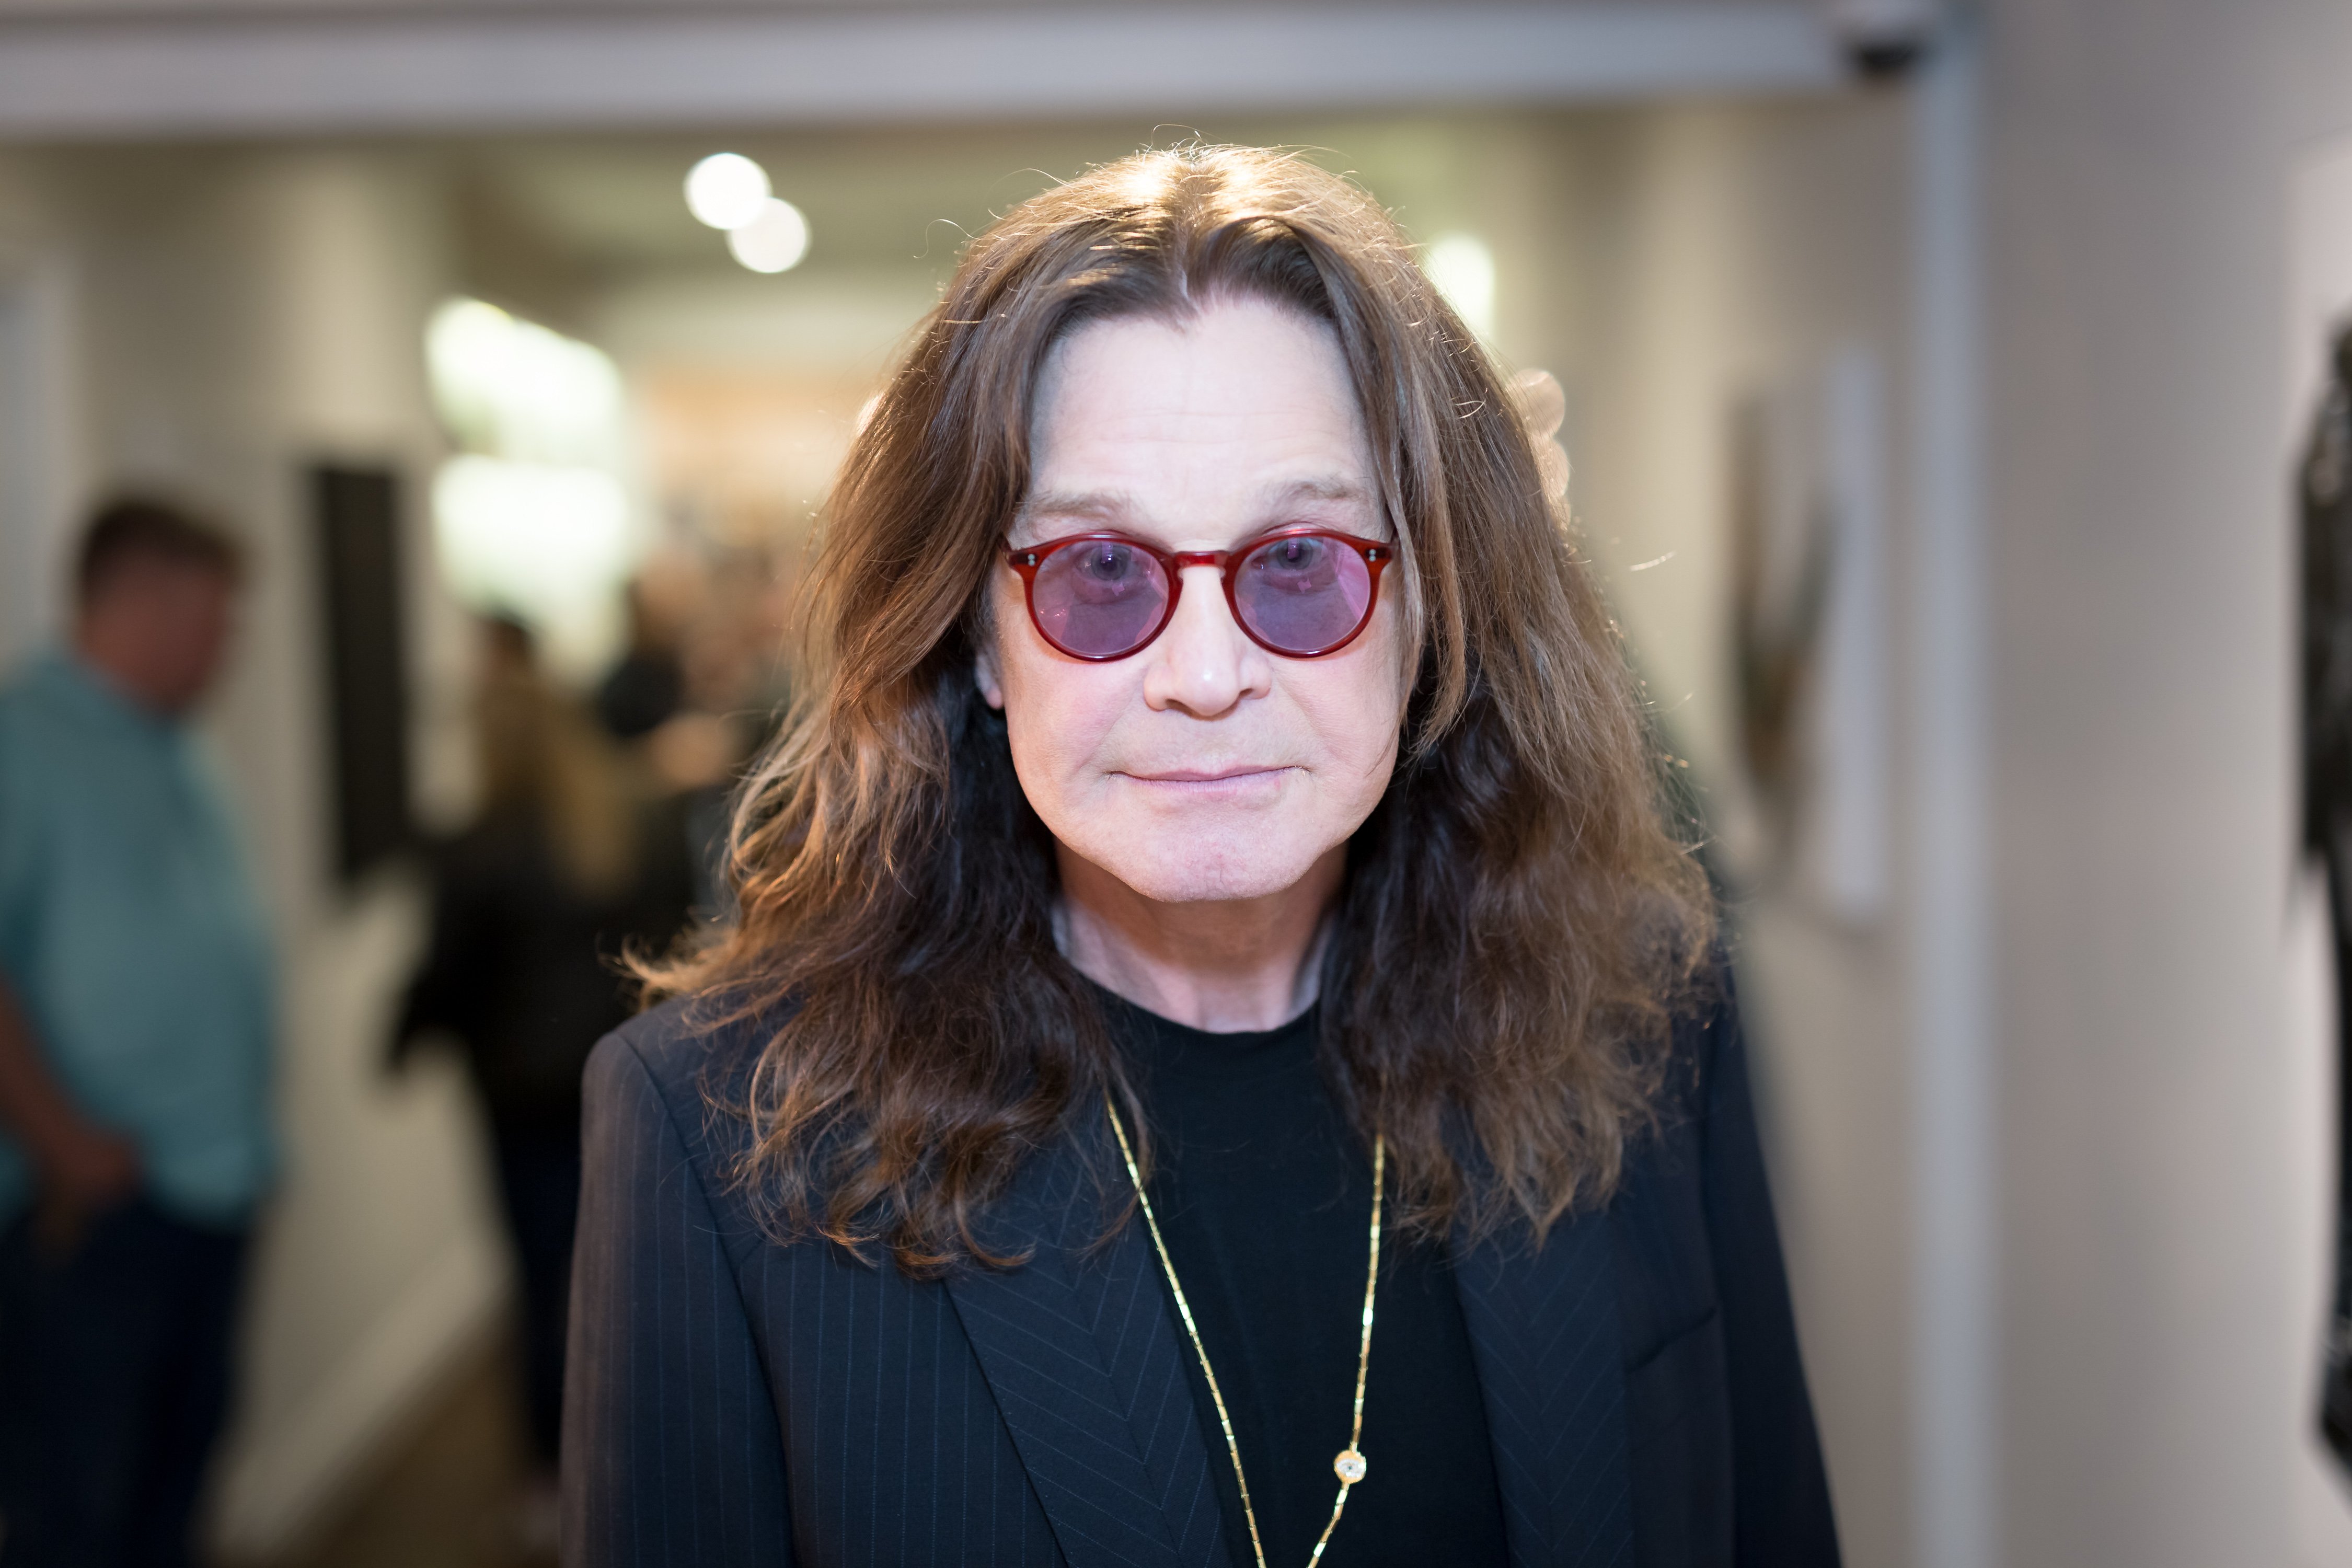 Singer Ozzy Osbourne attends the Billy Morrison - Aude Somnia Solo Exhibition at Elisabeth Weinstock on September 28, 2017, in Los Angeles, California. | Source: Getty Images.